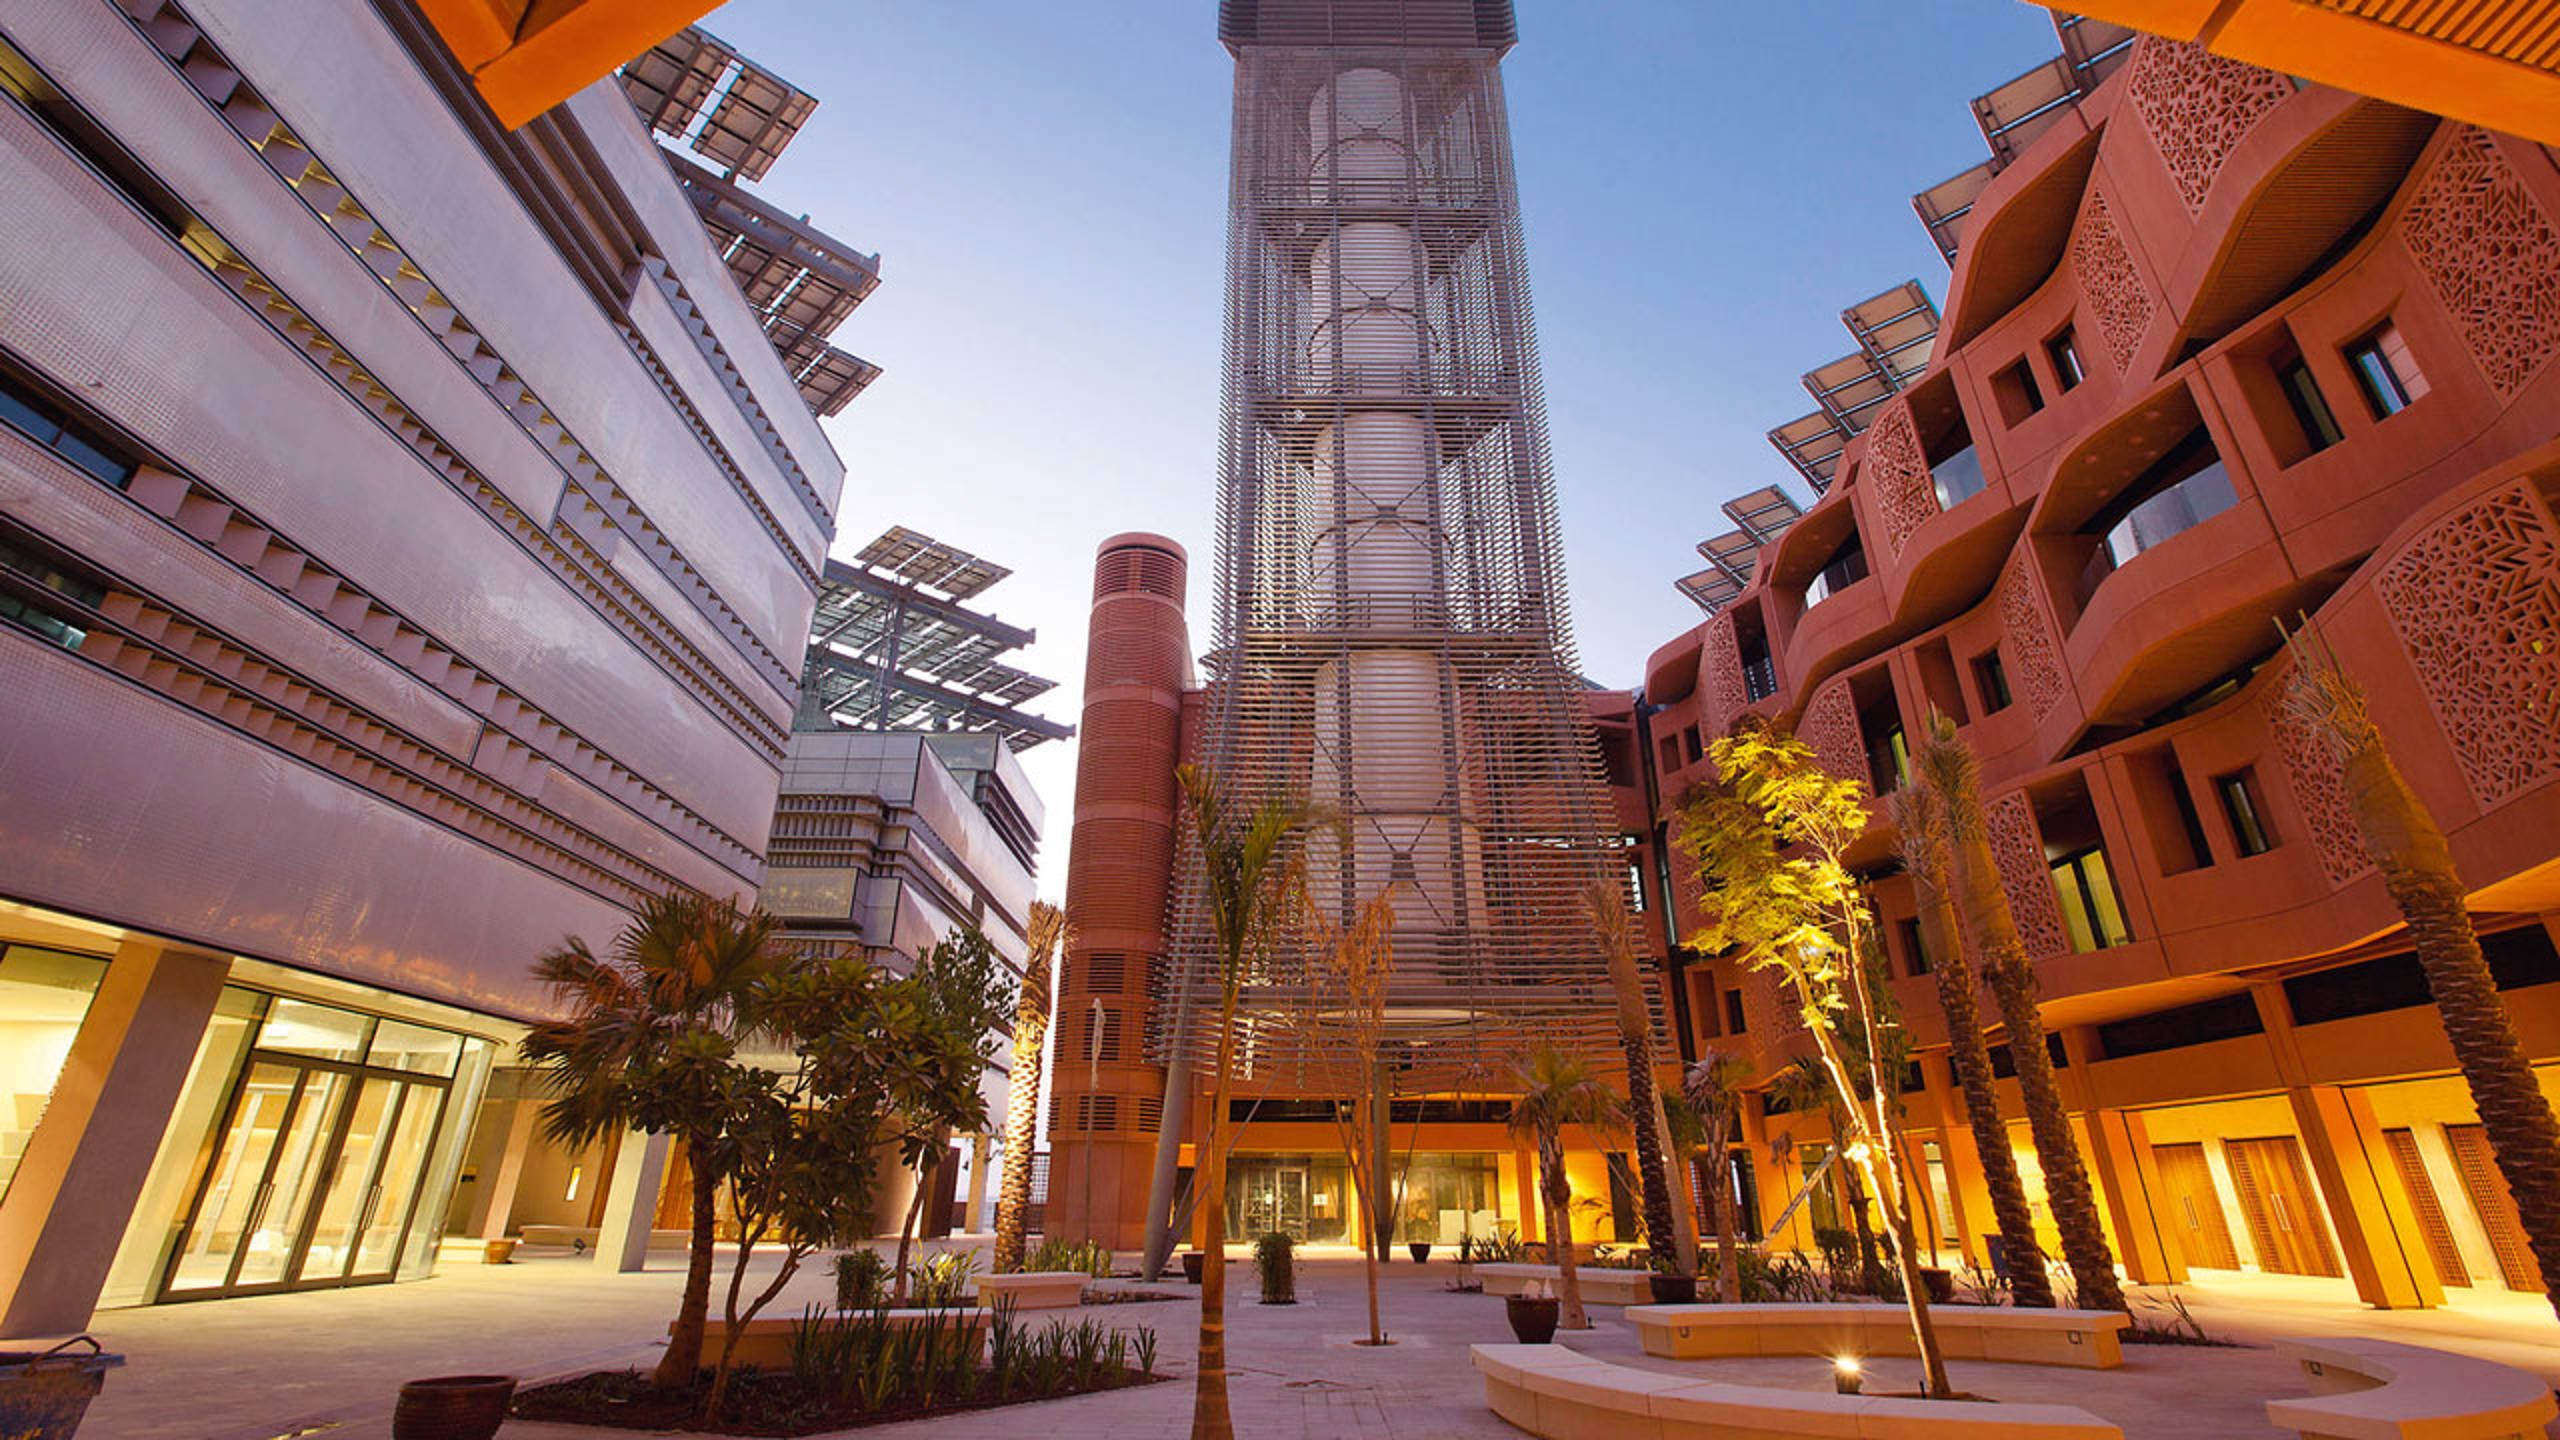 Masdar City near Abu Dhabi is aspiring to be one of the most sustainable cities in the world. Covering an area of approximately 6km2 Masdar City will integrate the full range of renewable energy and sustainability technologies, across a living and working community.